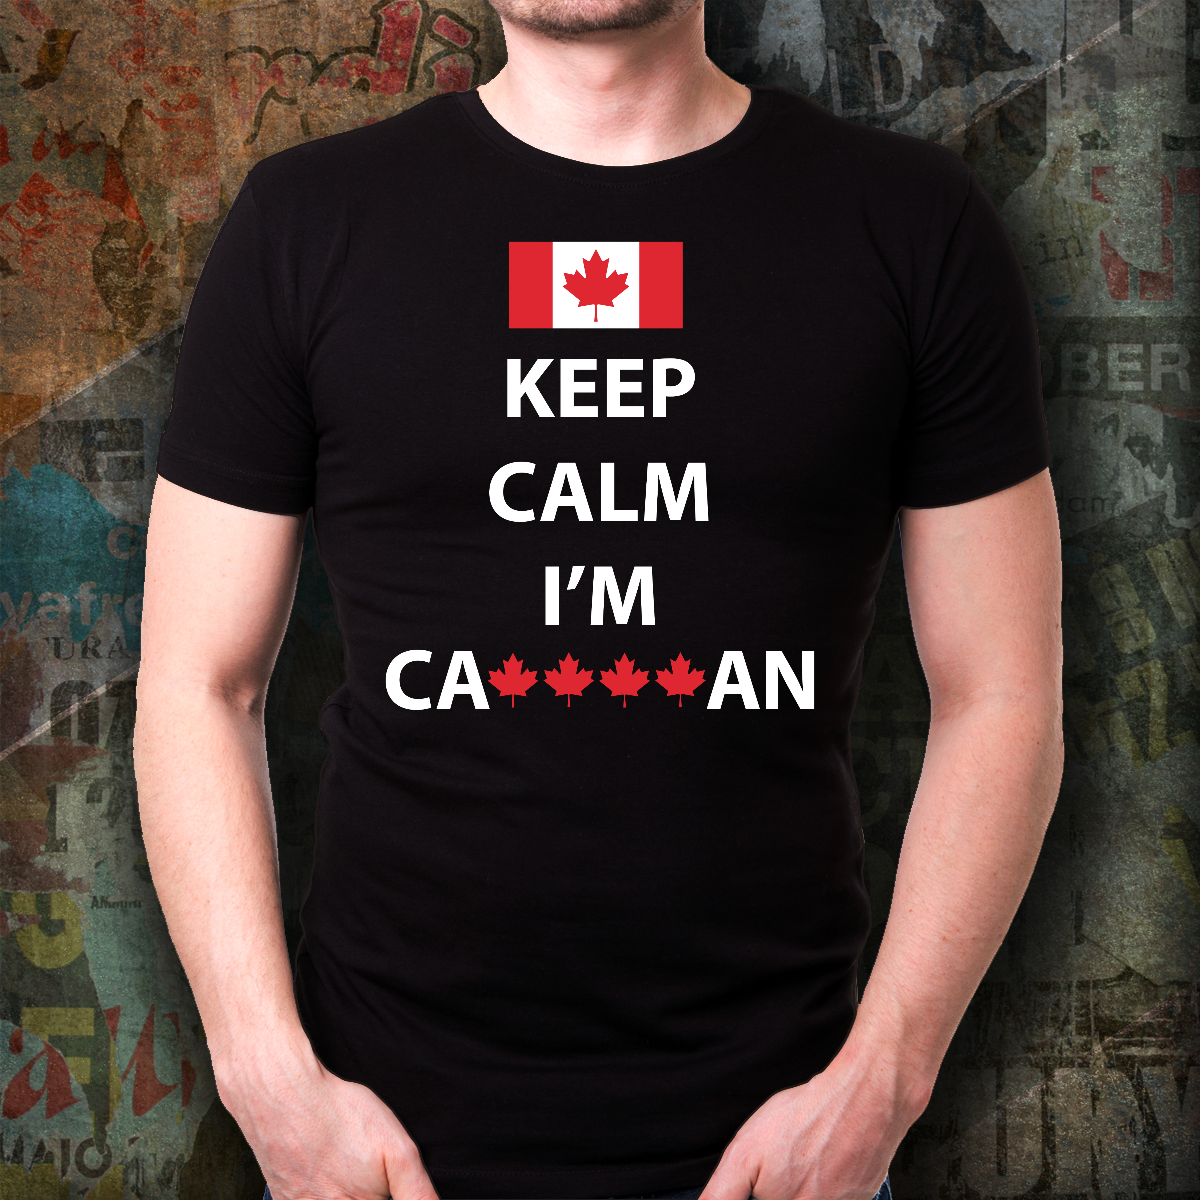 Father's Day Gift 2020, Keep Calm Canada T-shirt Personalized Gift For Dad, Canada Day 2020